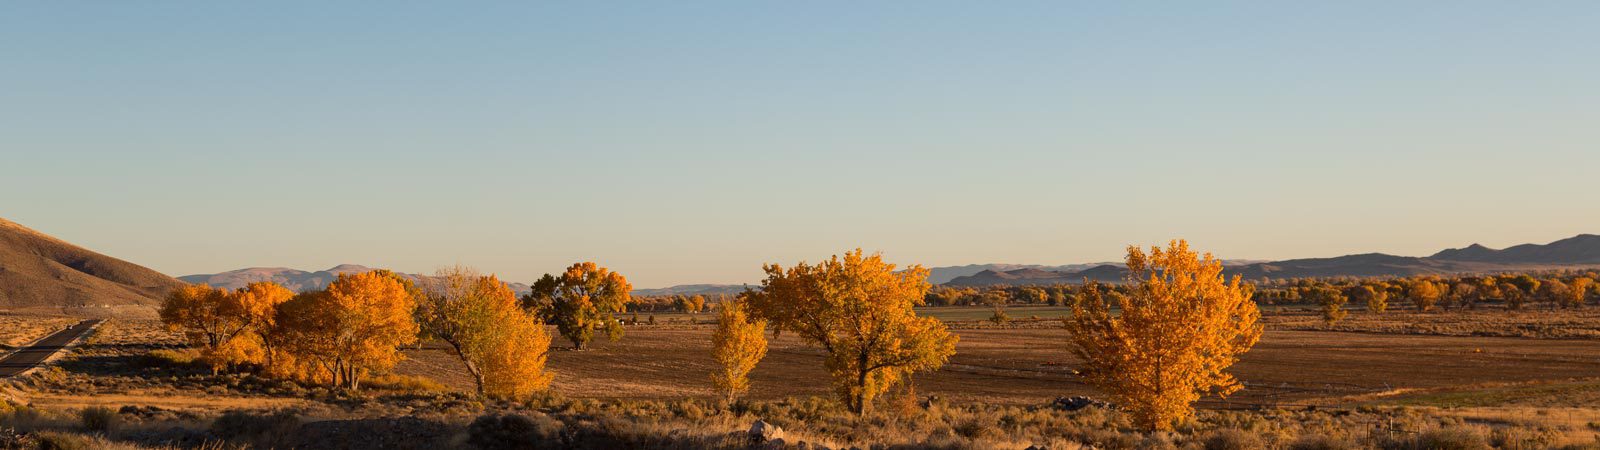 Cottonwoods in fall color in Mason Valley Nevada